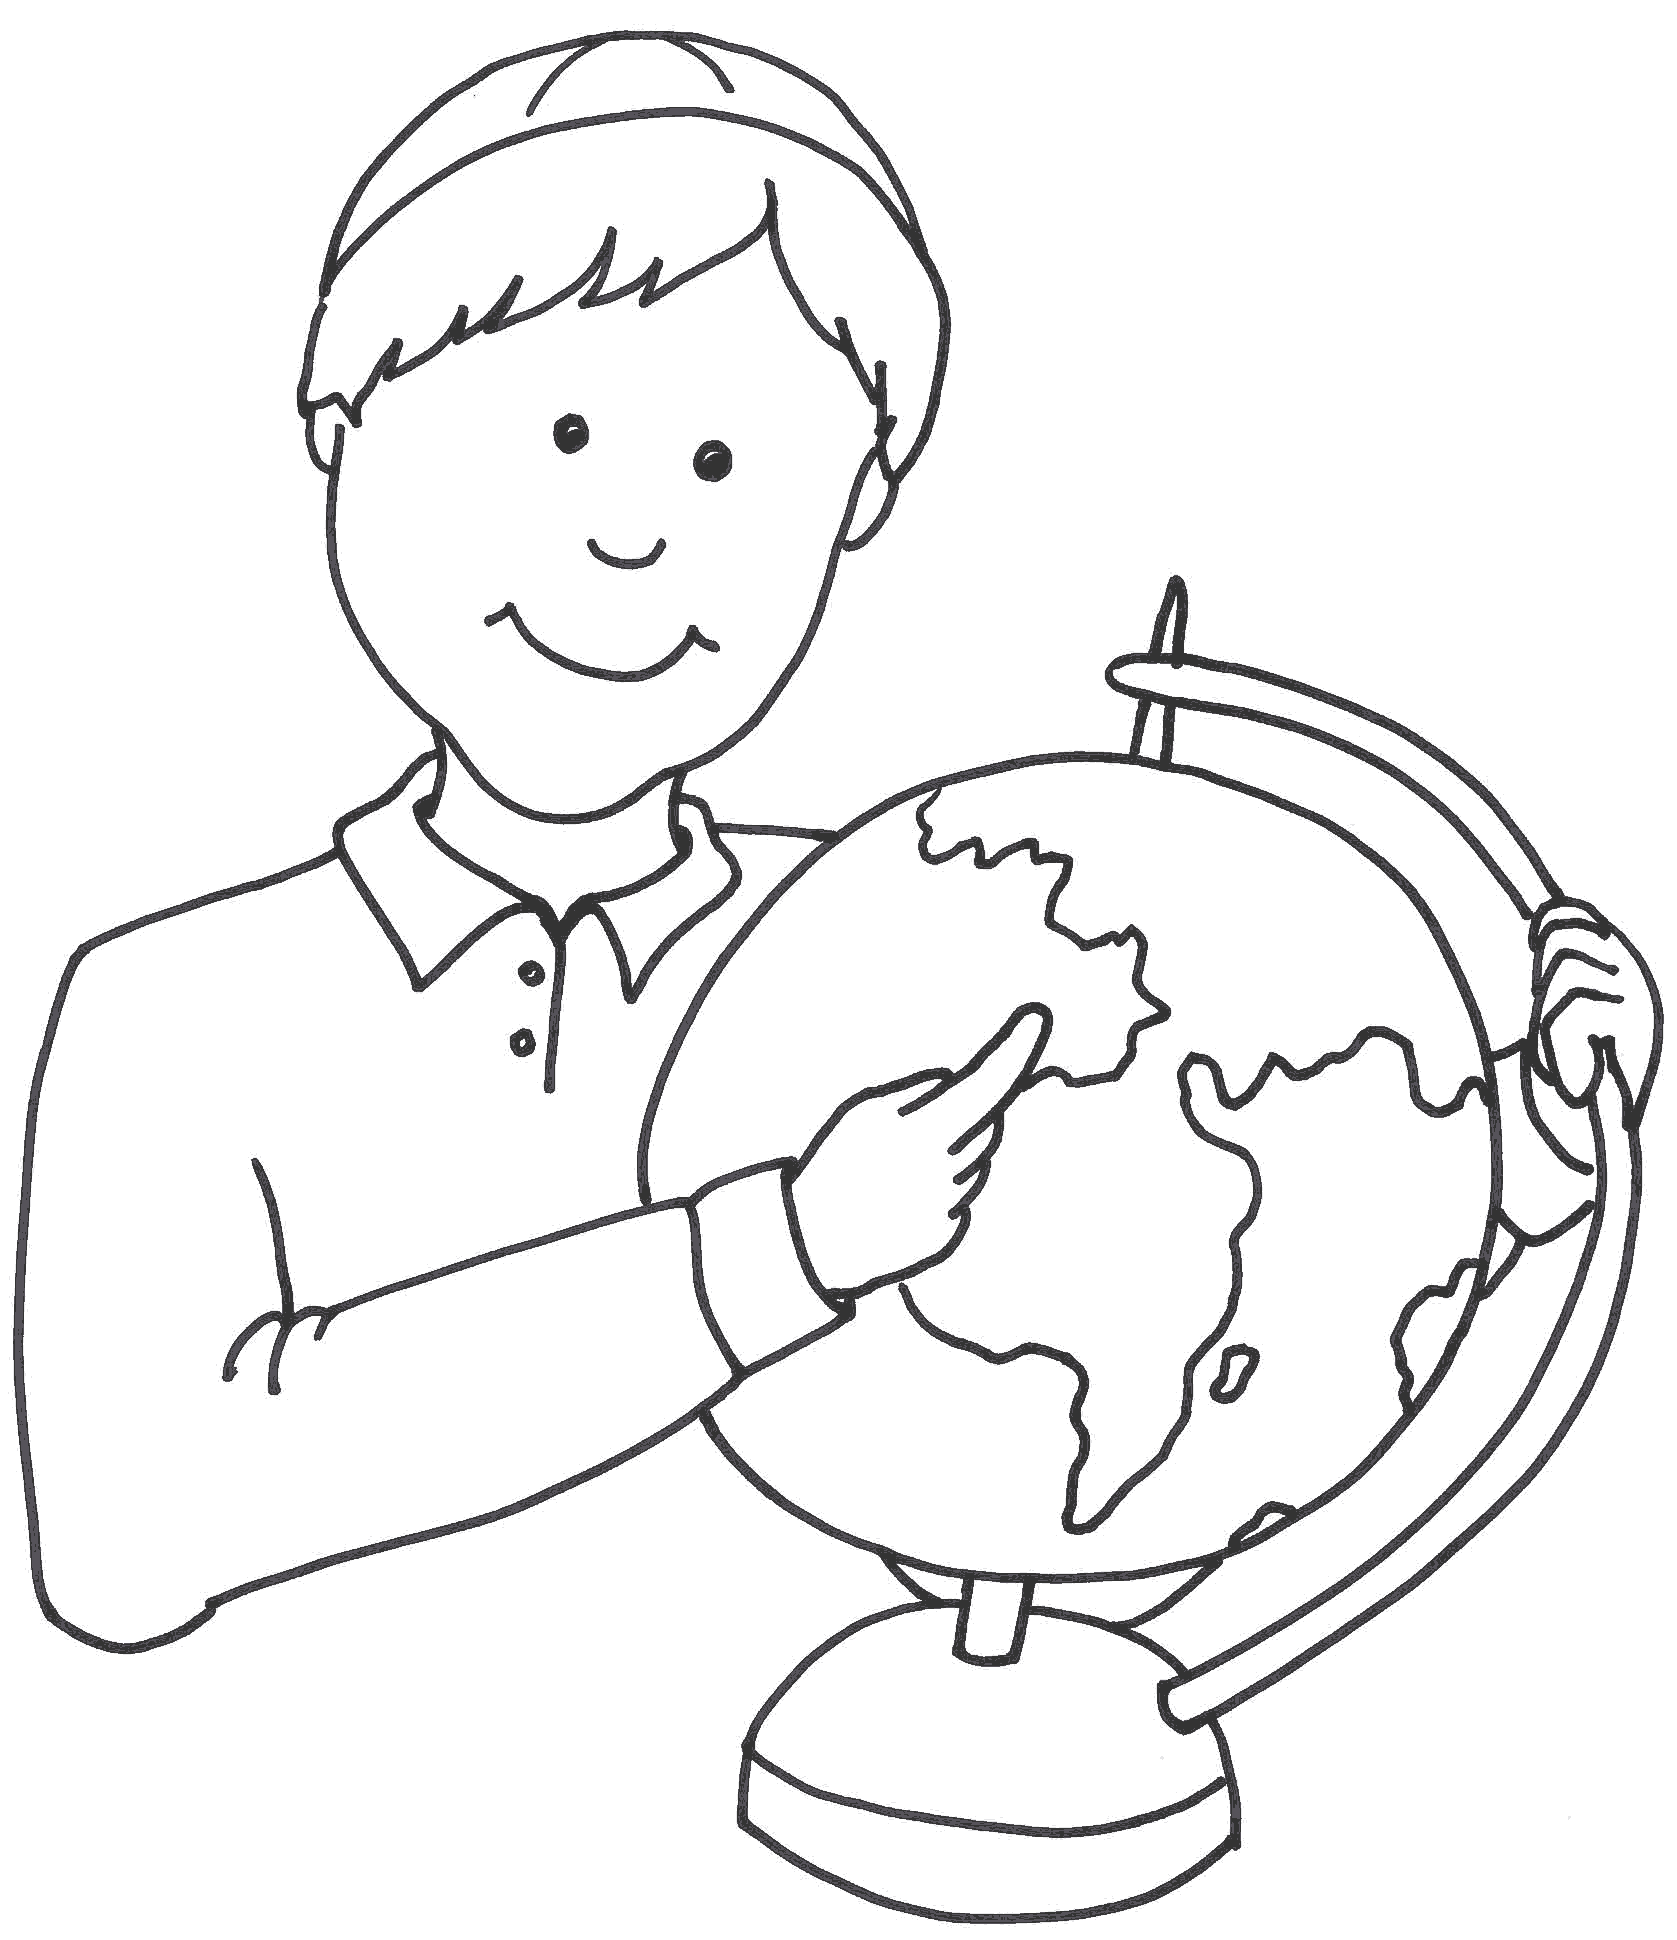 Globe Clipart Black and White craft projects, School Clipart